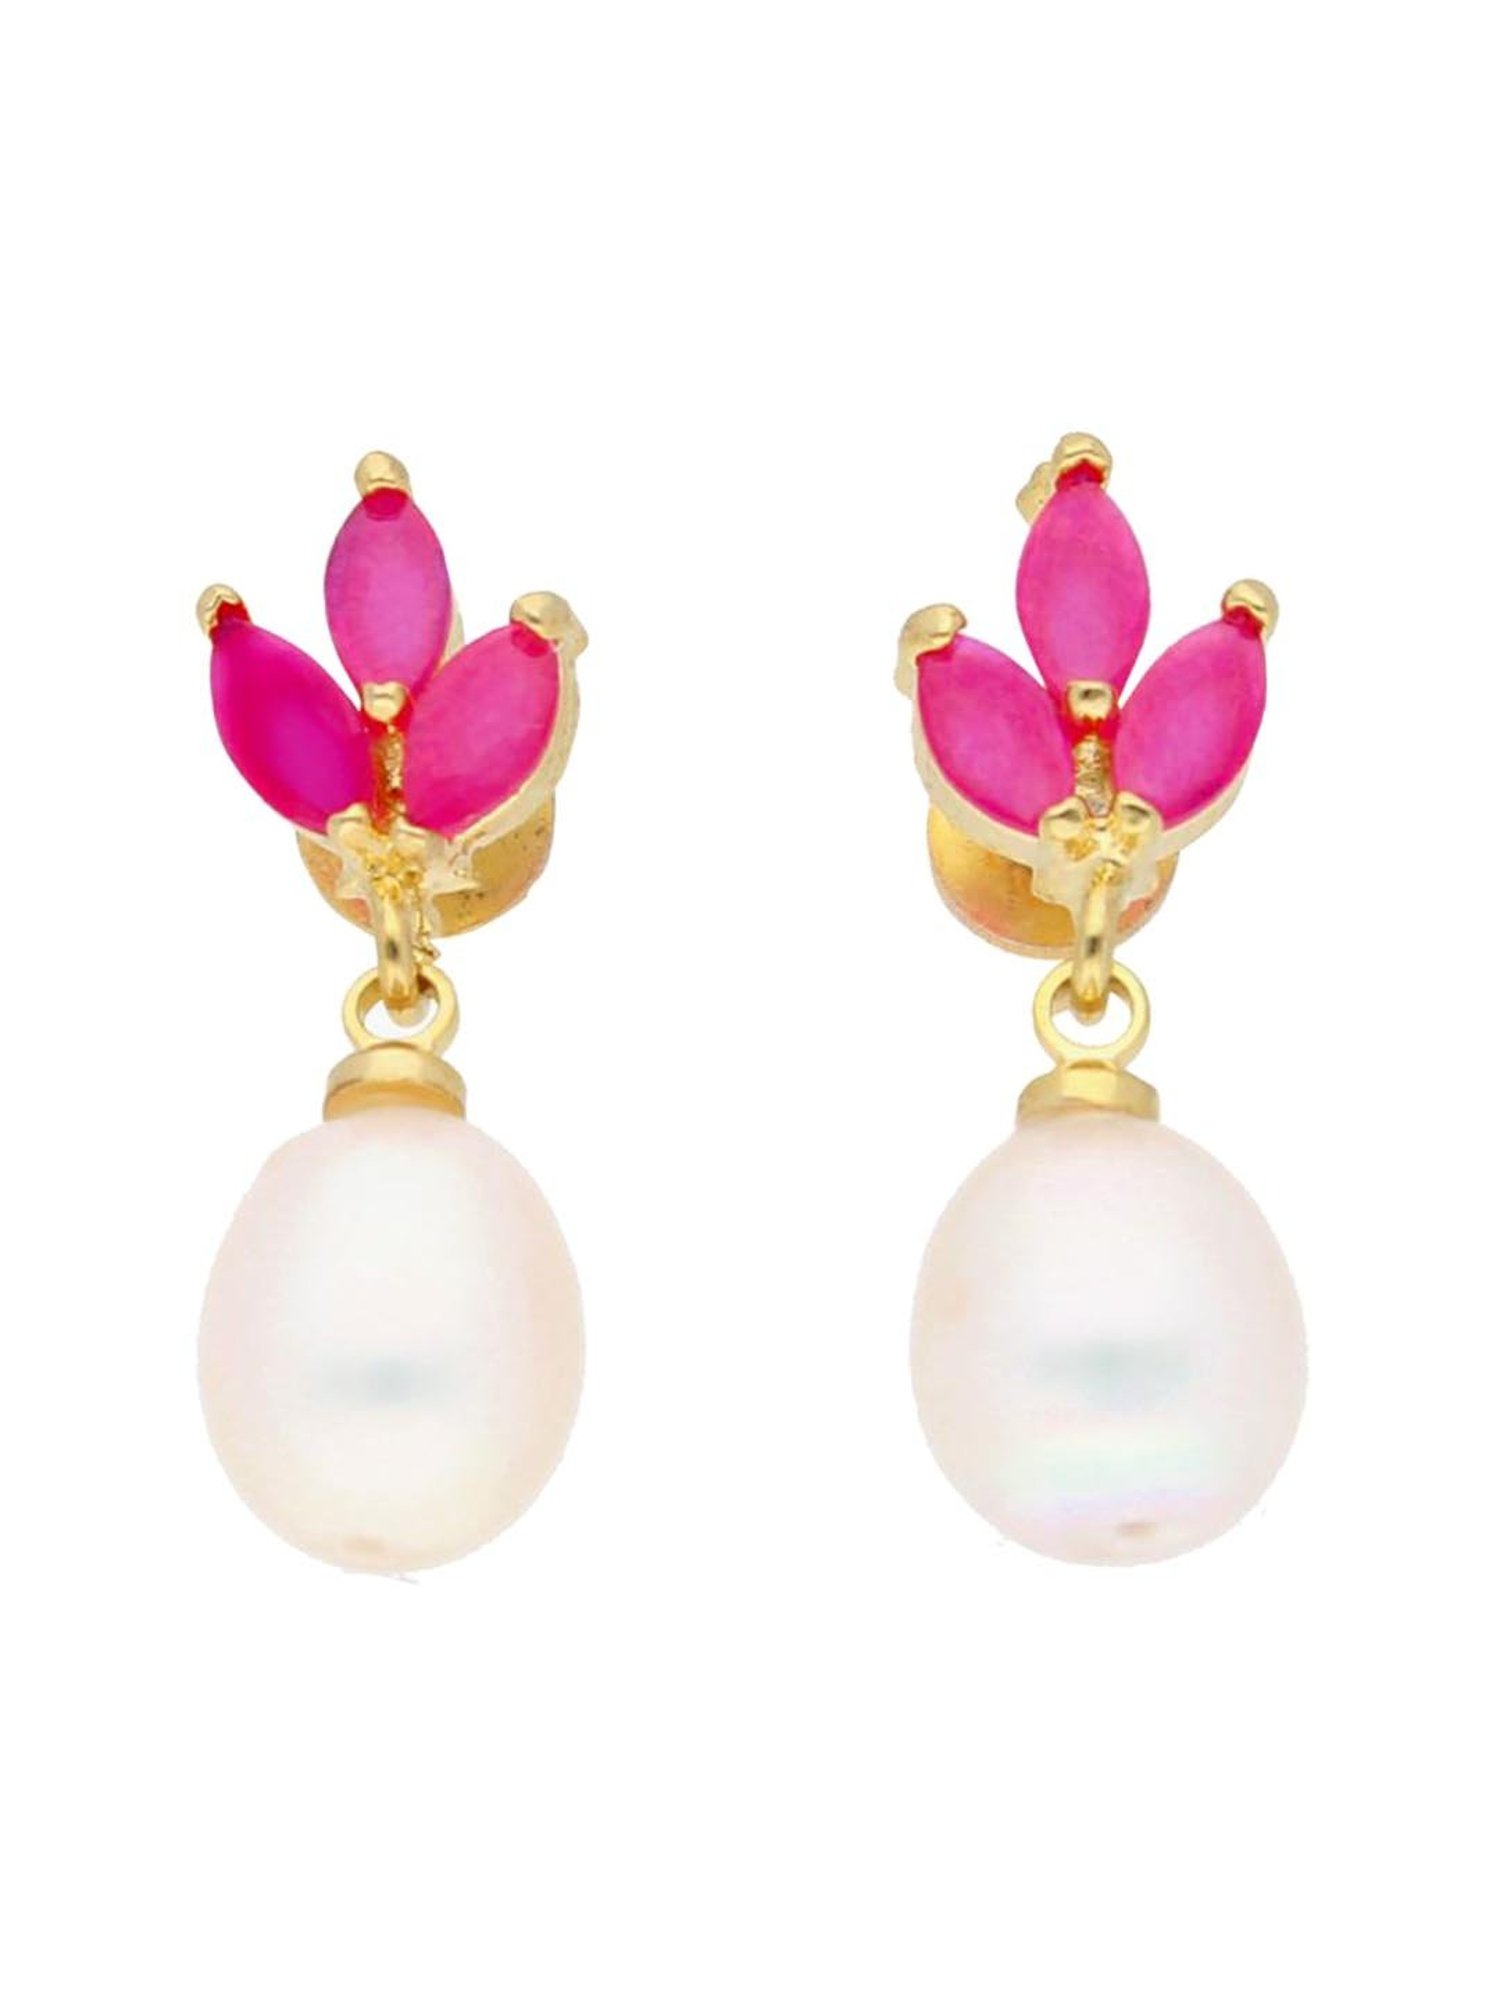 Pink Freshwater Pearl Leverback Earrings 8-8.5mm On 9K Yellow Gold